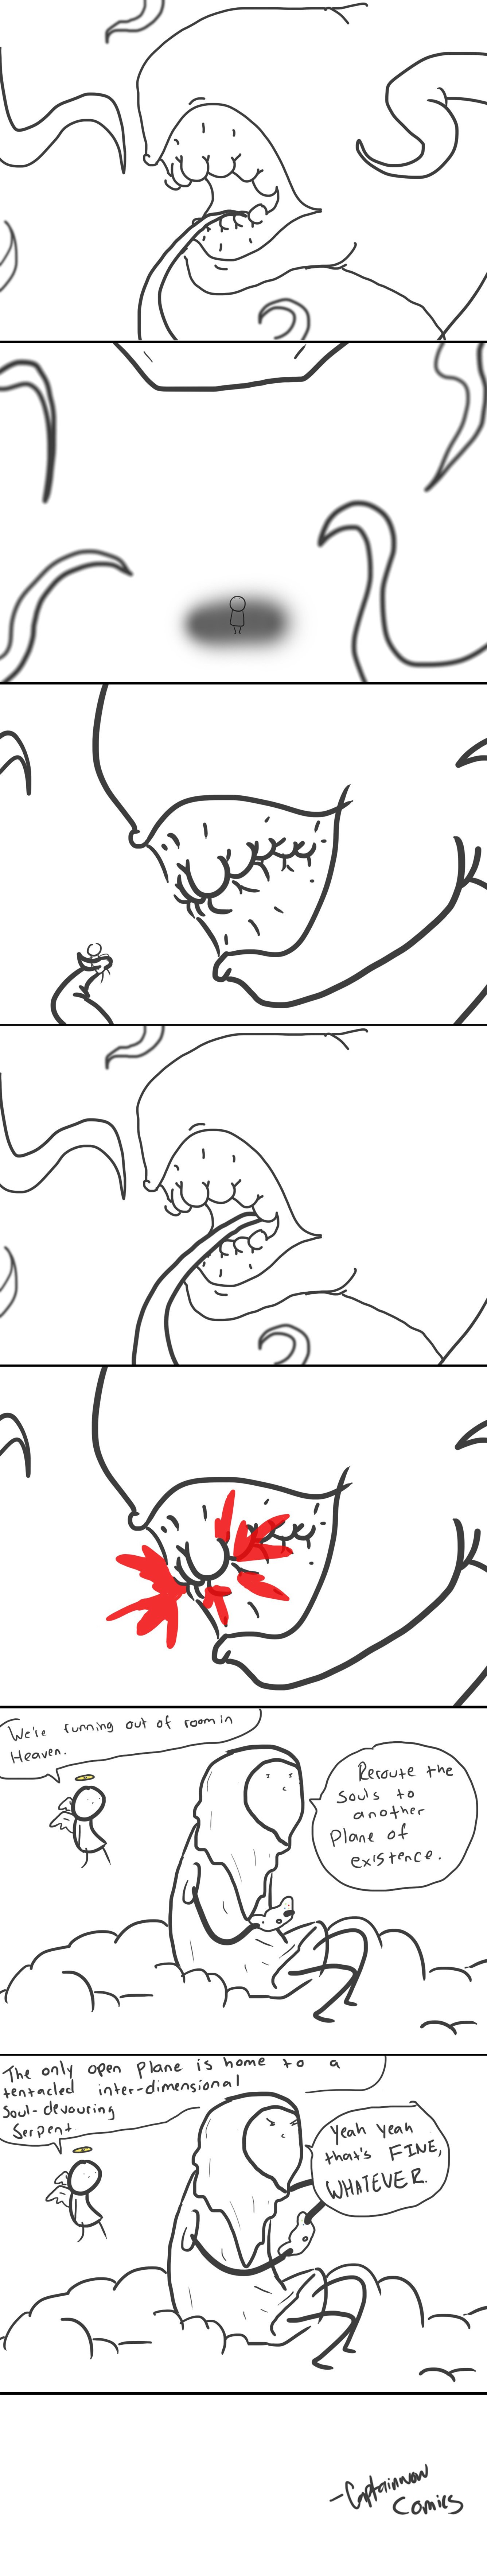 A Comic with Things Happening